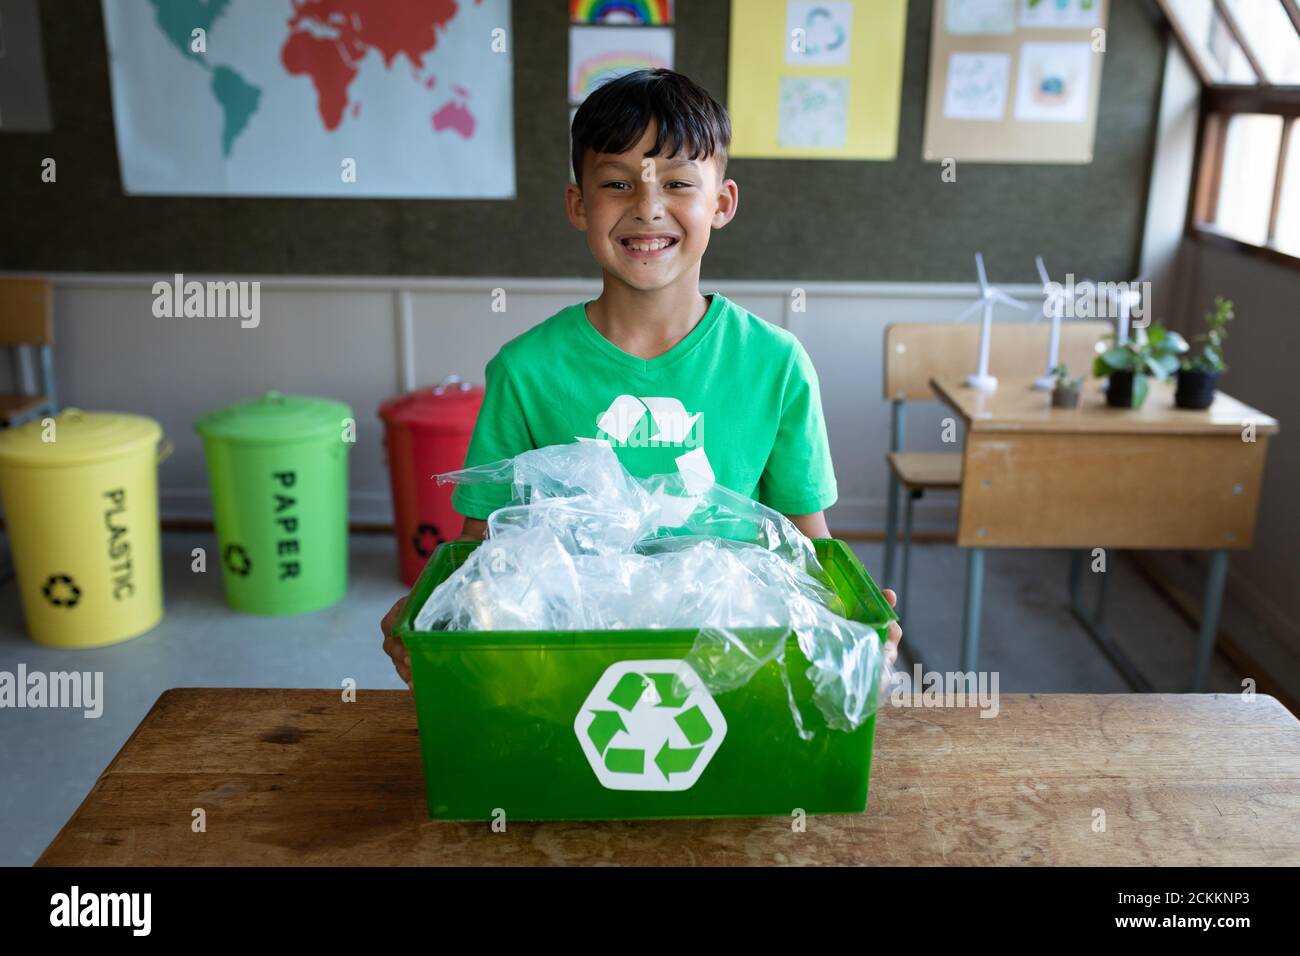 Portrait of boy holding a recycle container in class at school Stock Photo